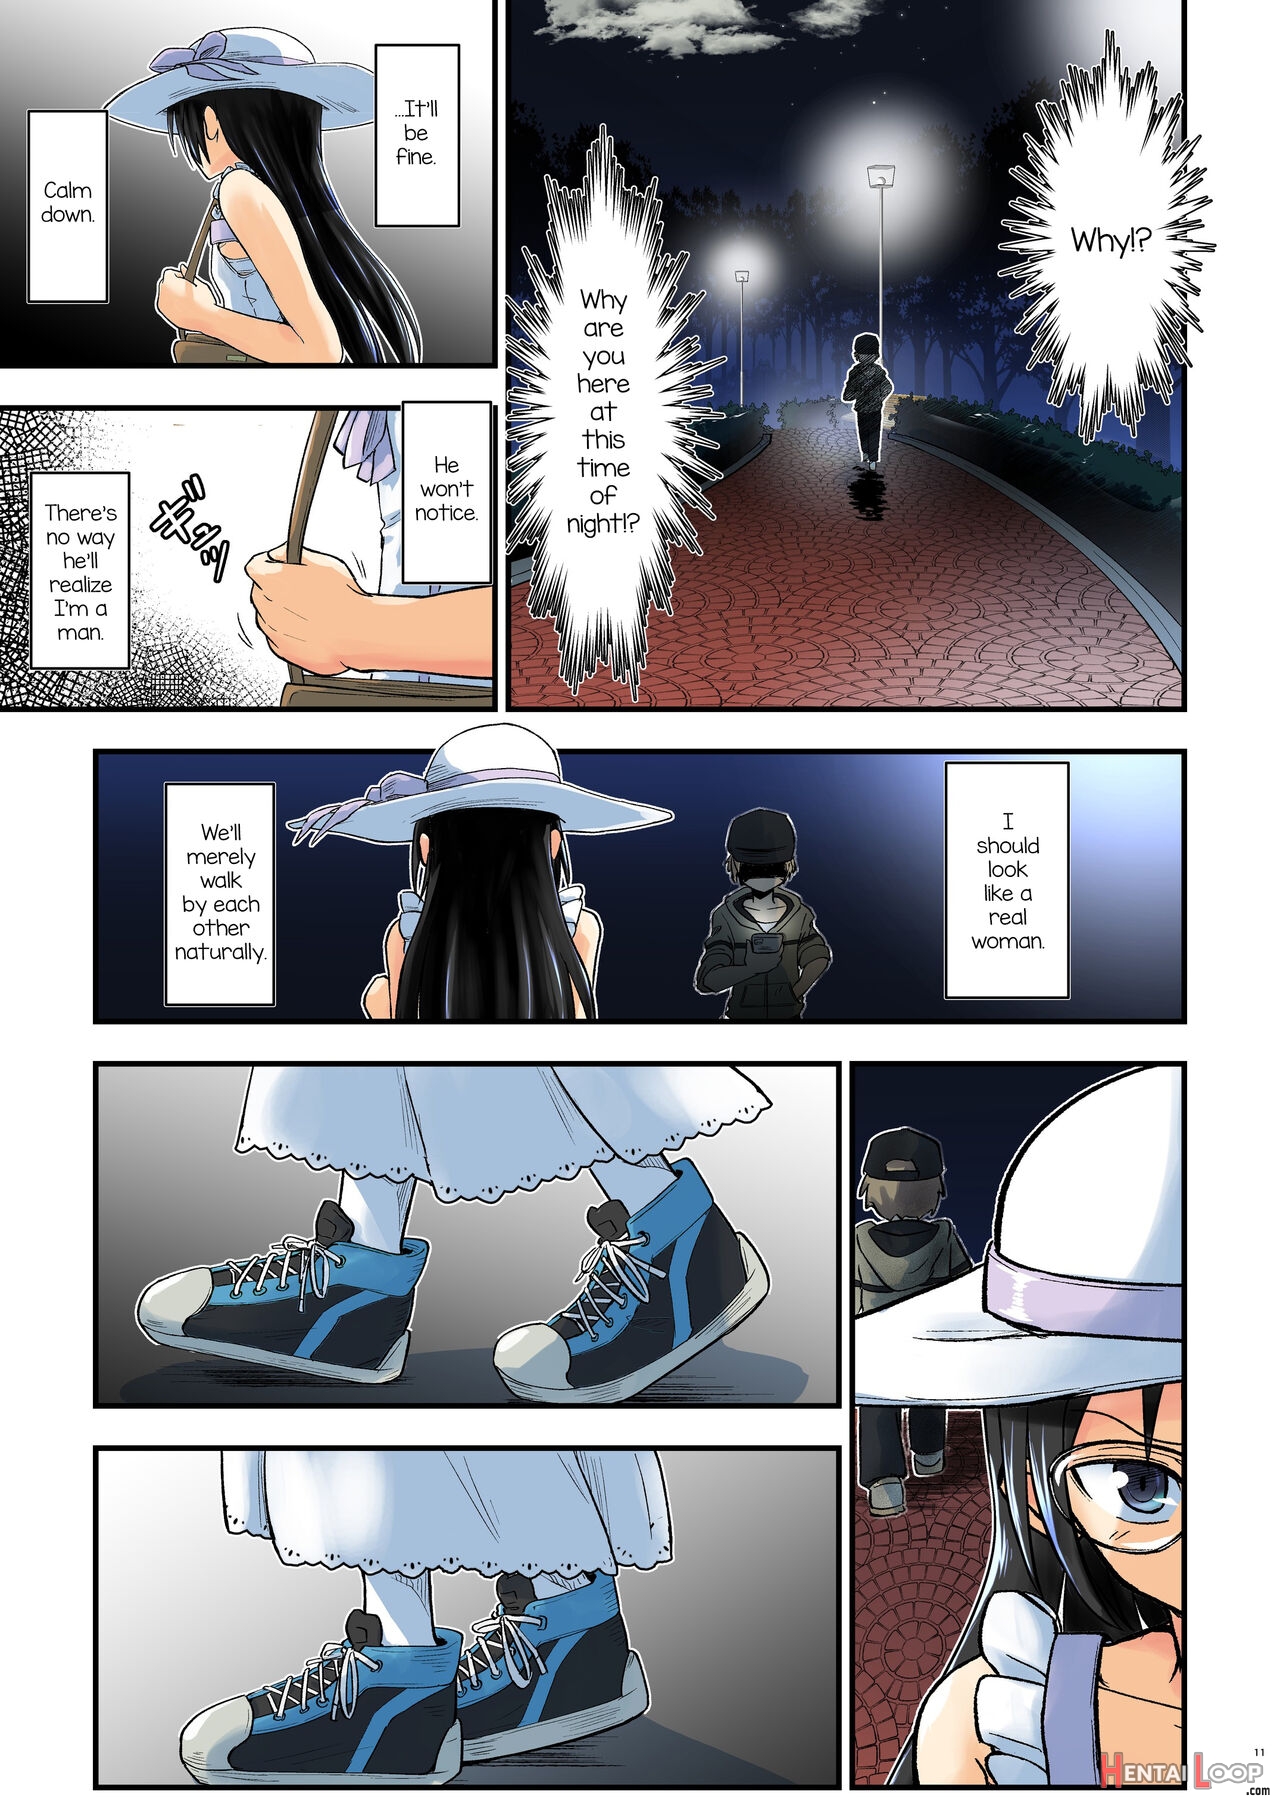 Kiriko Route Another #07 page 11